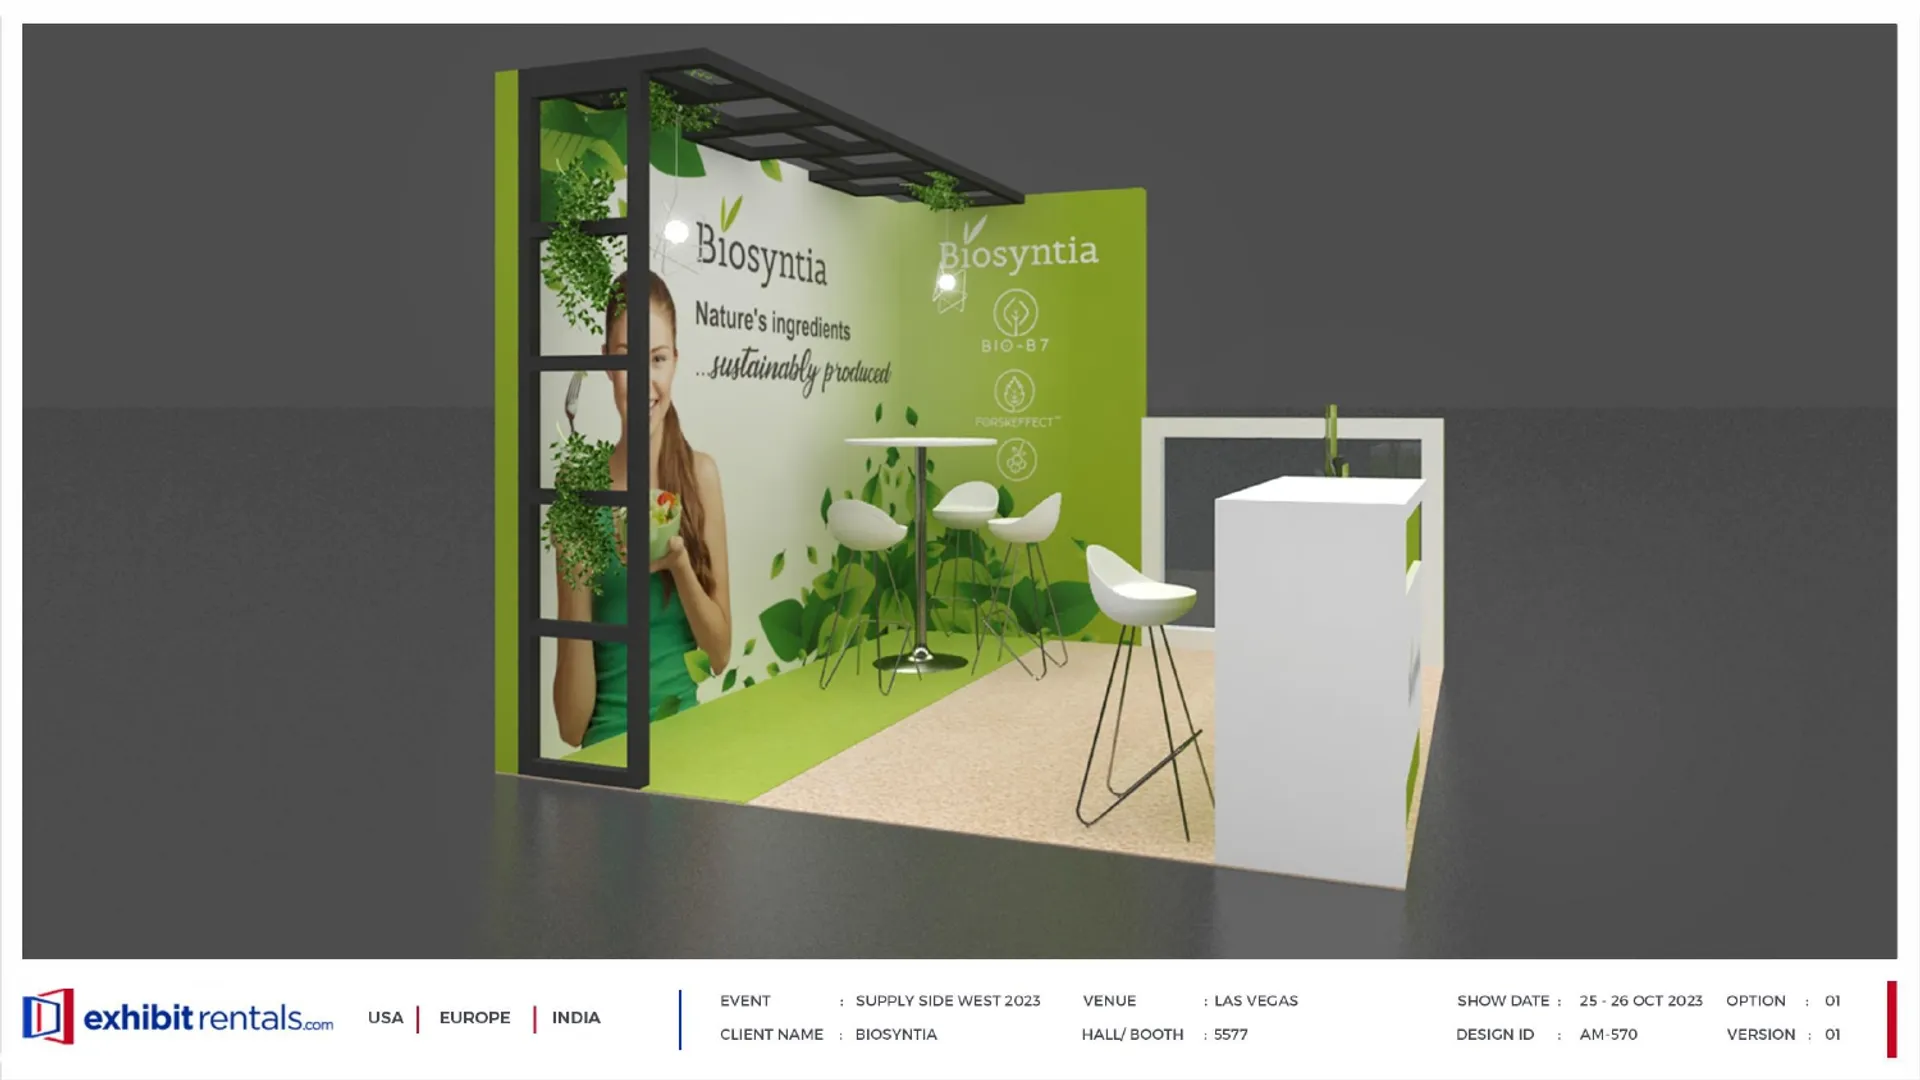 booth-design-projects/Exhibit-Rentals/2024-04-18-10x10-PERIMETER-Project-91/1.1_Biosyntia_Supply Side West 2023_ER Design presentation-16_page-0001 (1)-llv1gt.jpg